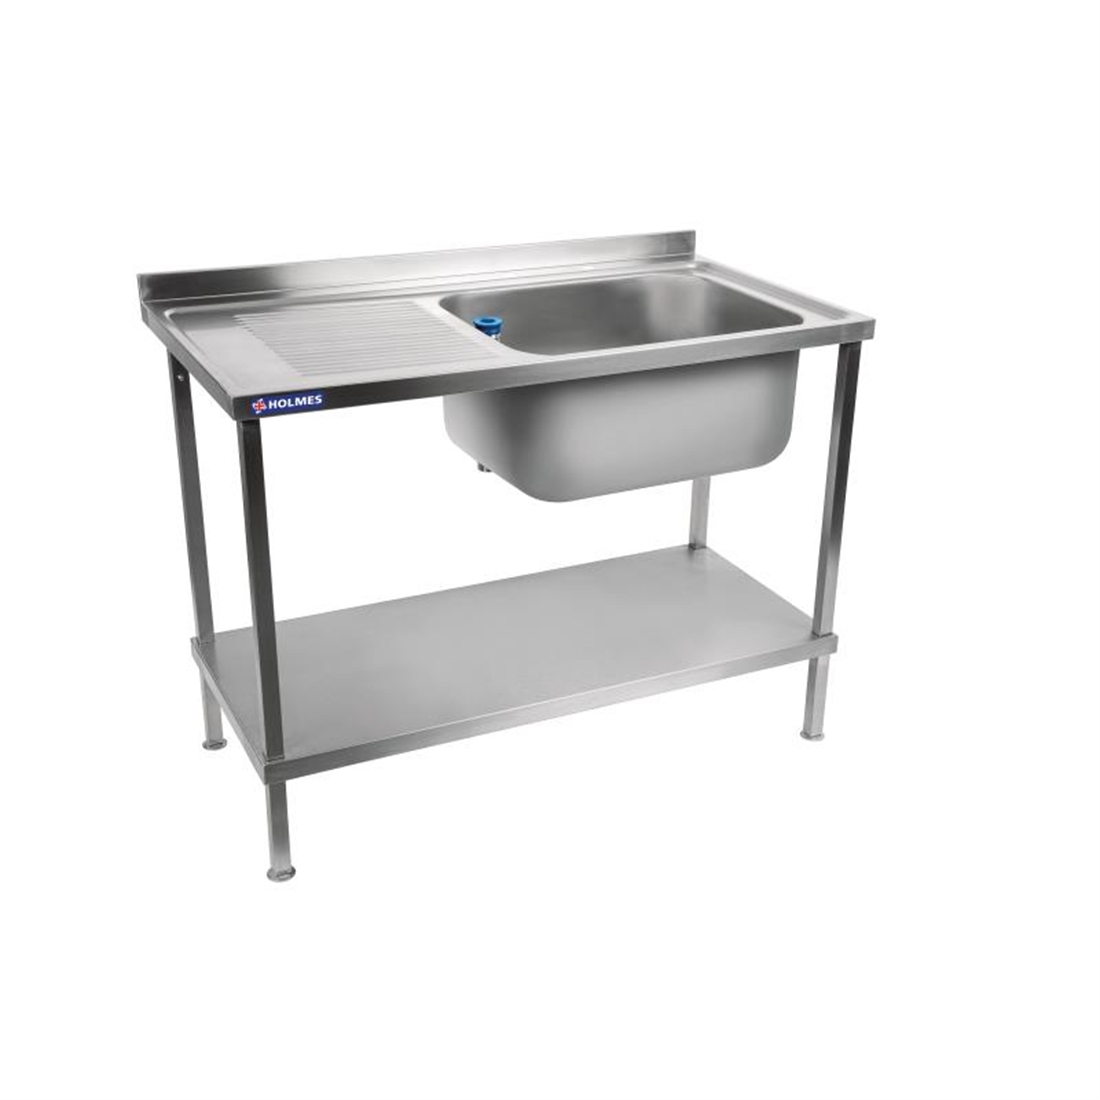 Holmes Self Assembly Stainless Steel Sink Left Hand Drainer 1200mm